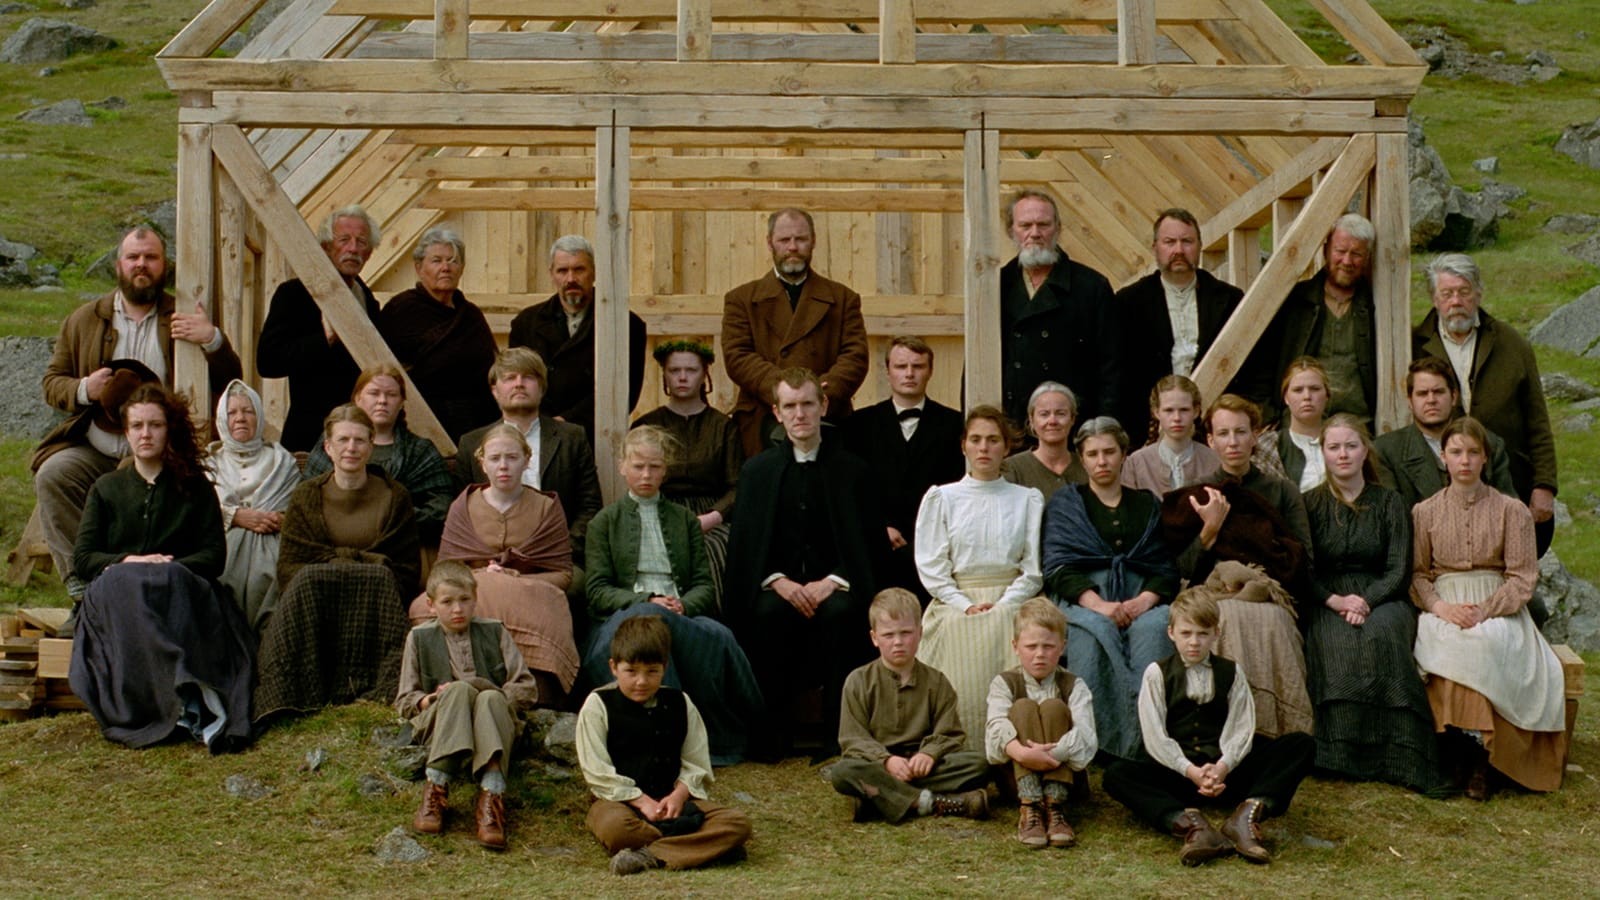 A large group of men, women & children, all dressed in early 20th Century garb are posed in front of the frame of a building under construction.